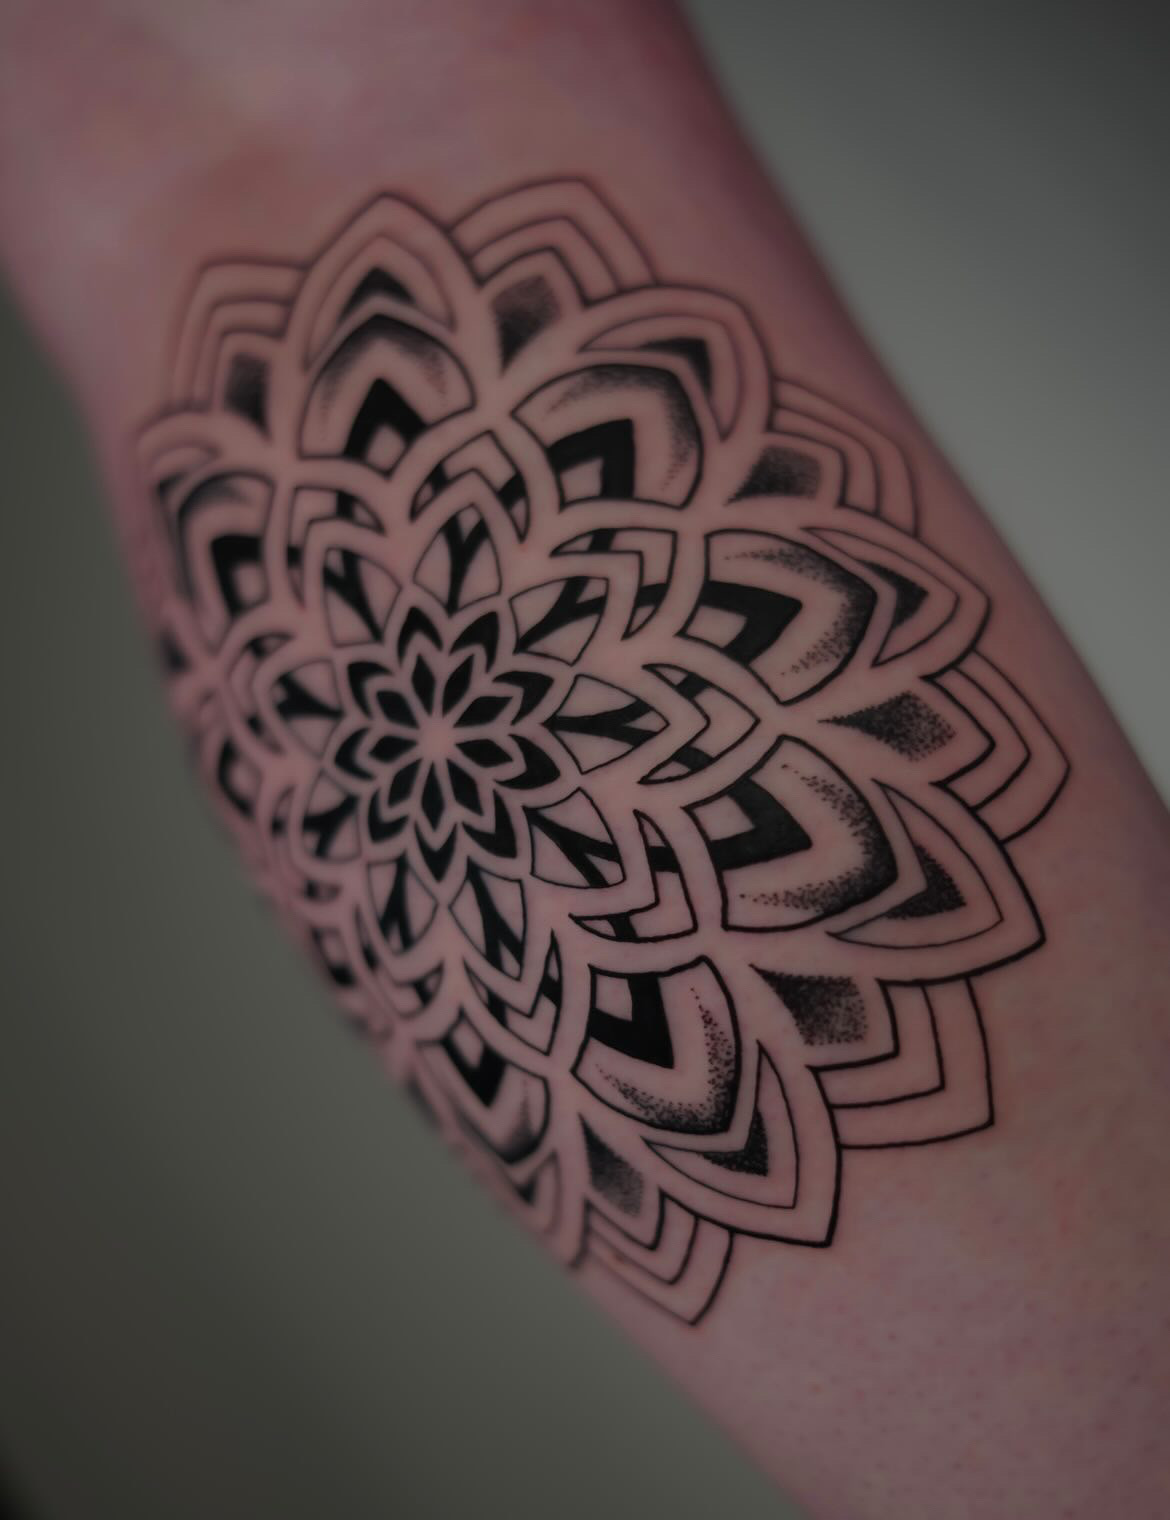 Forearm tattoo with block and grey point work of a mandala by tattoo artist Alessandra Clivio.